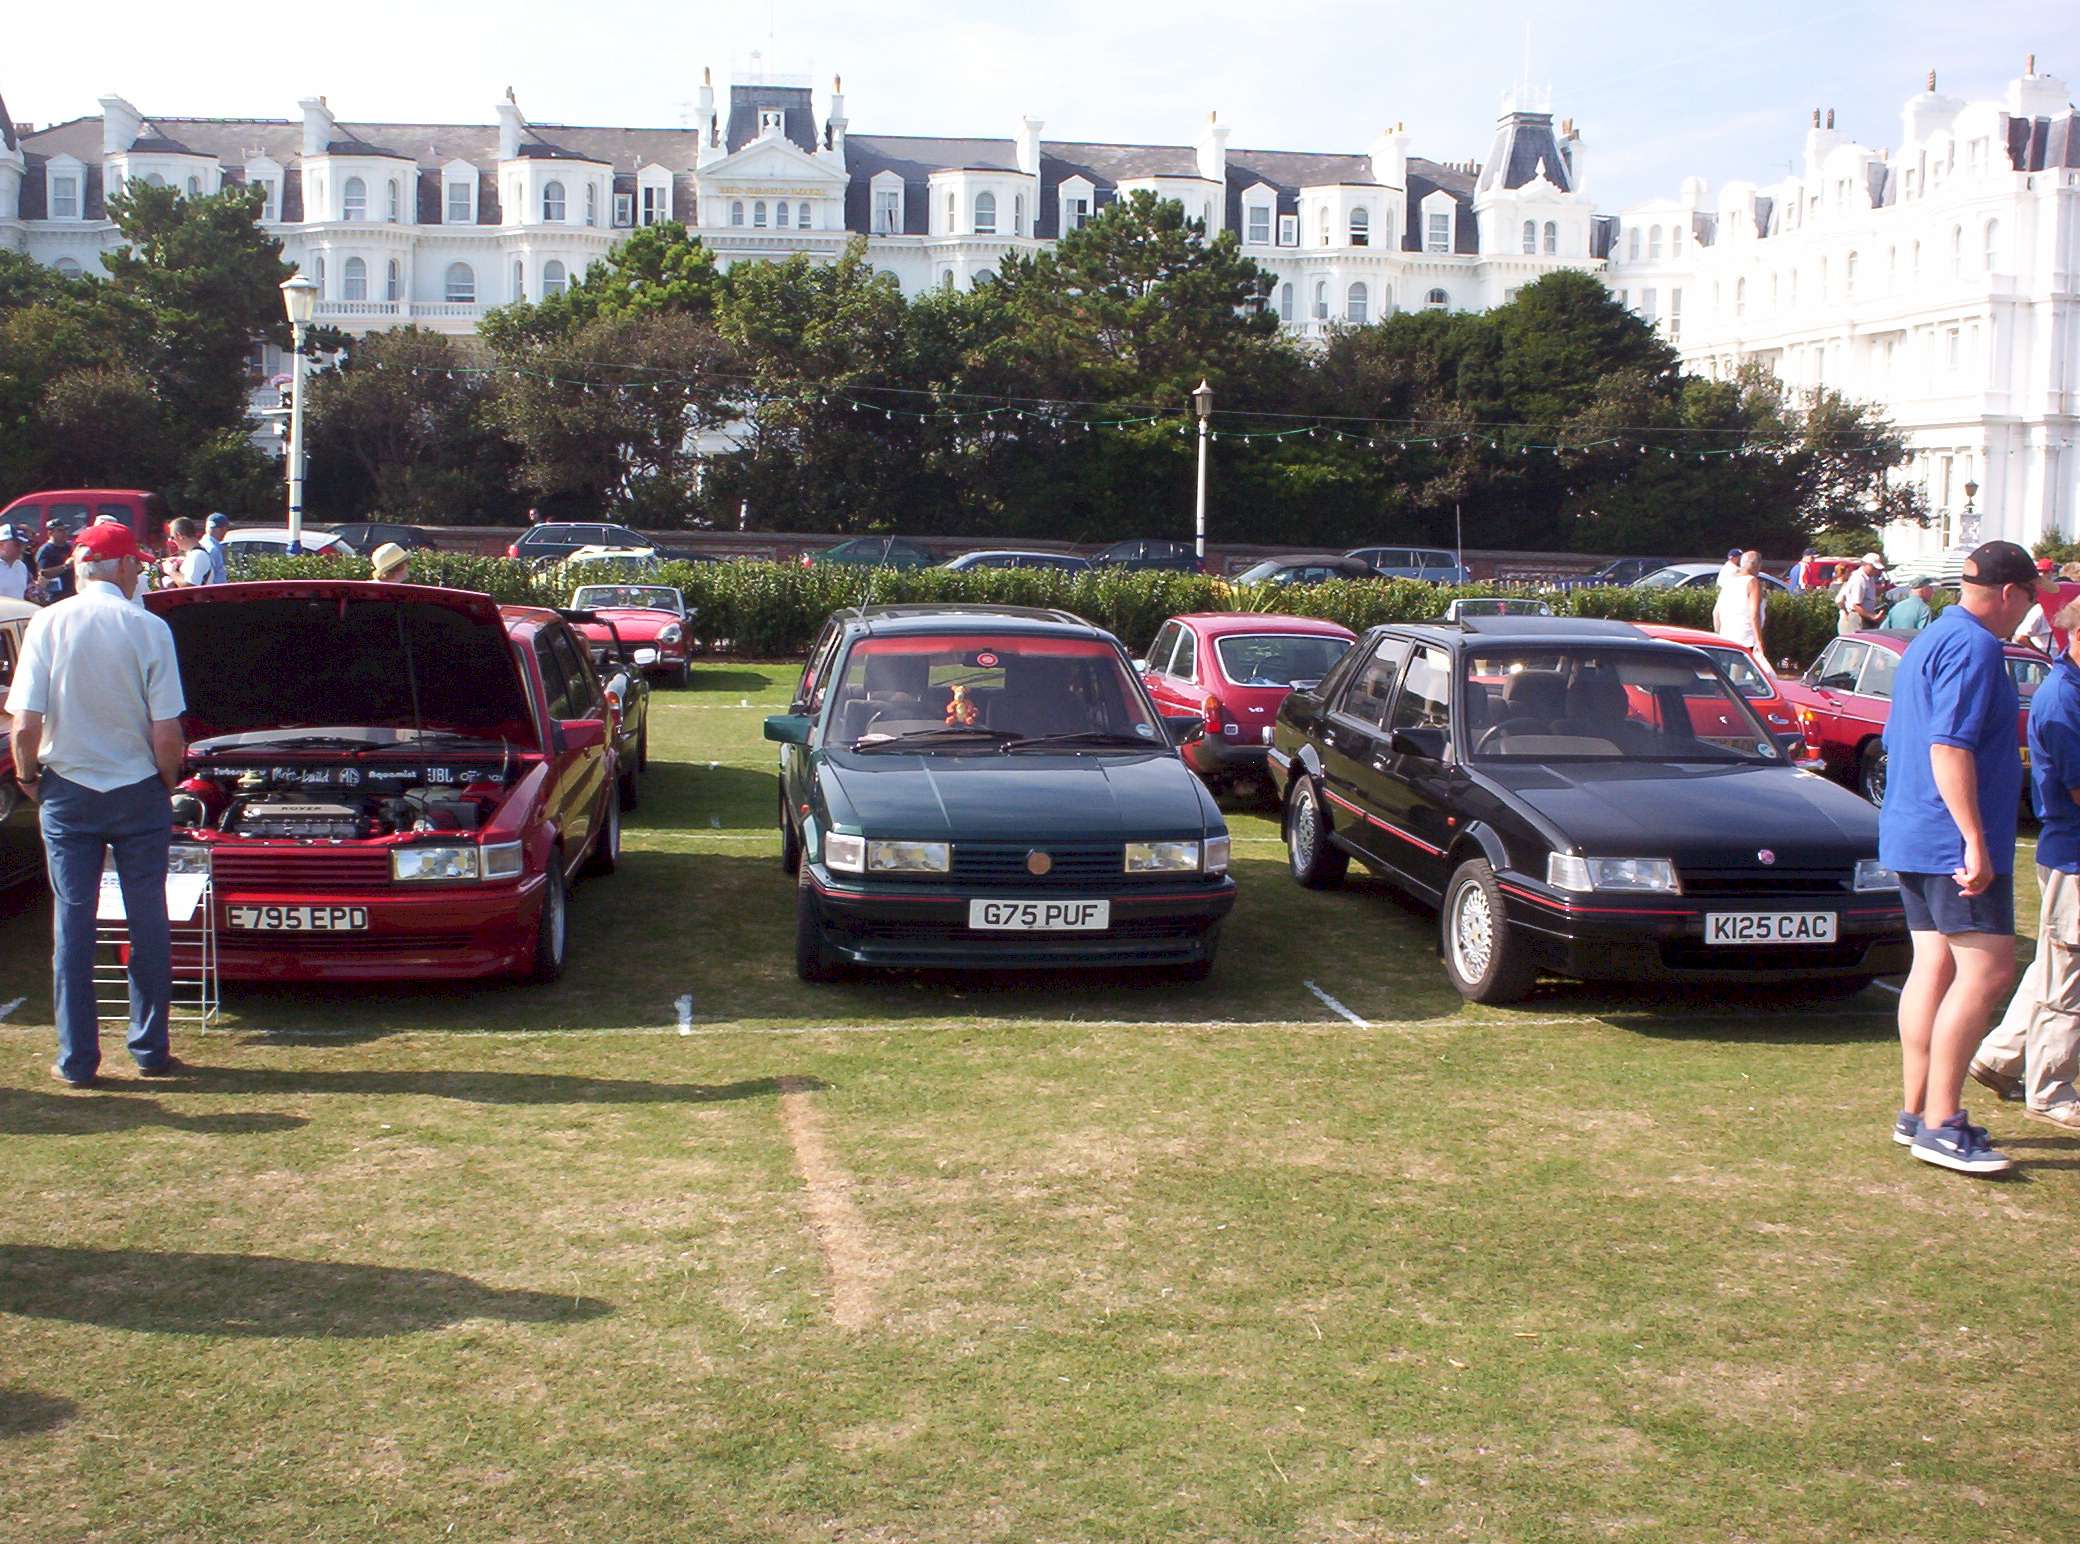 The Lawns at Eastbourne